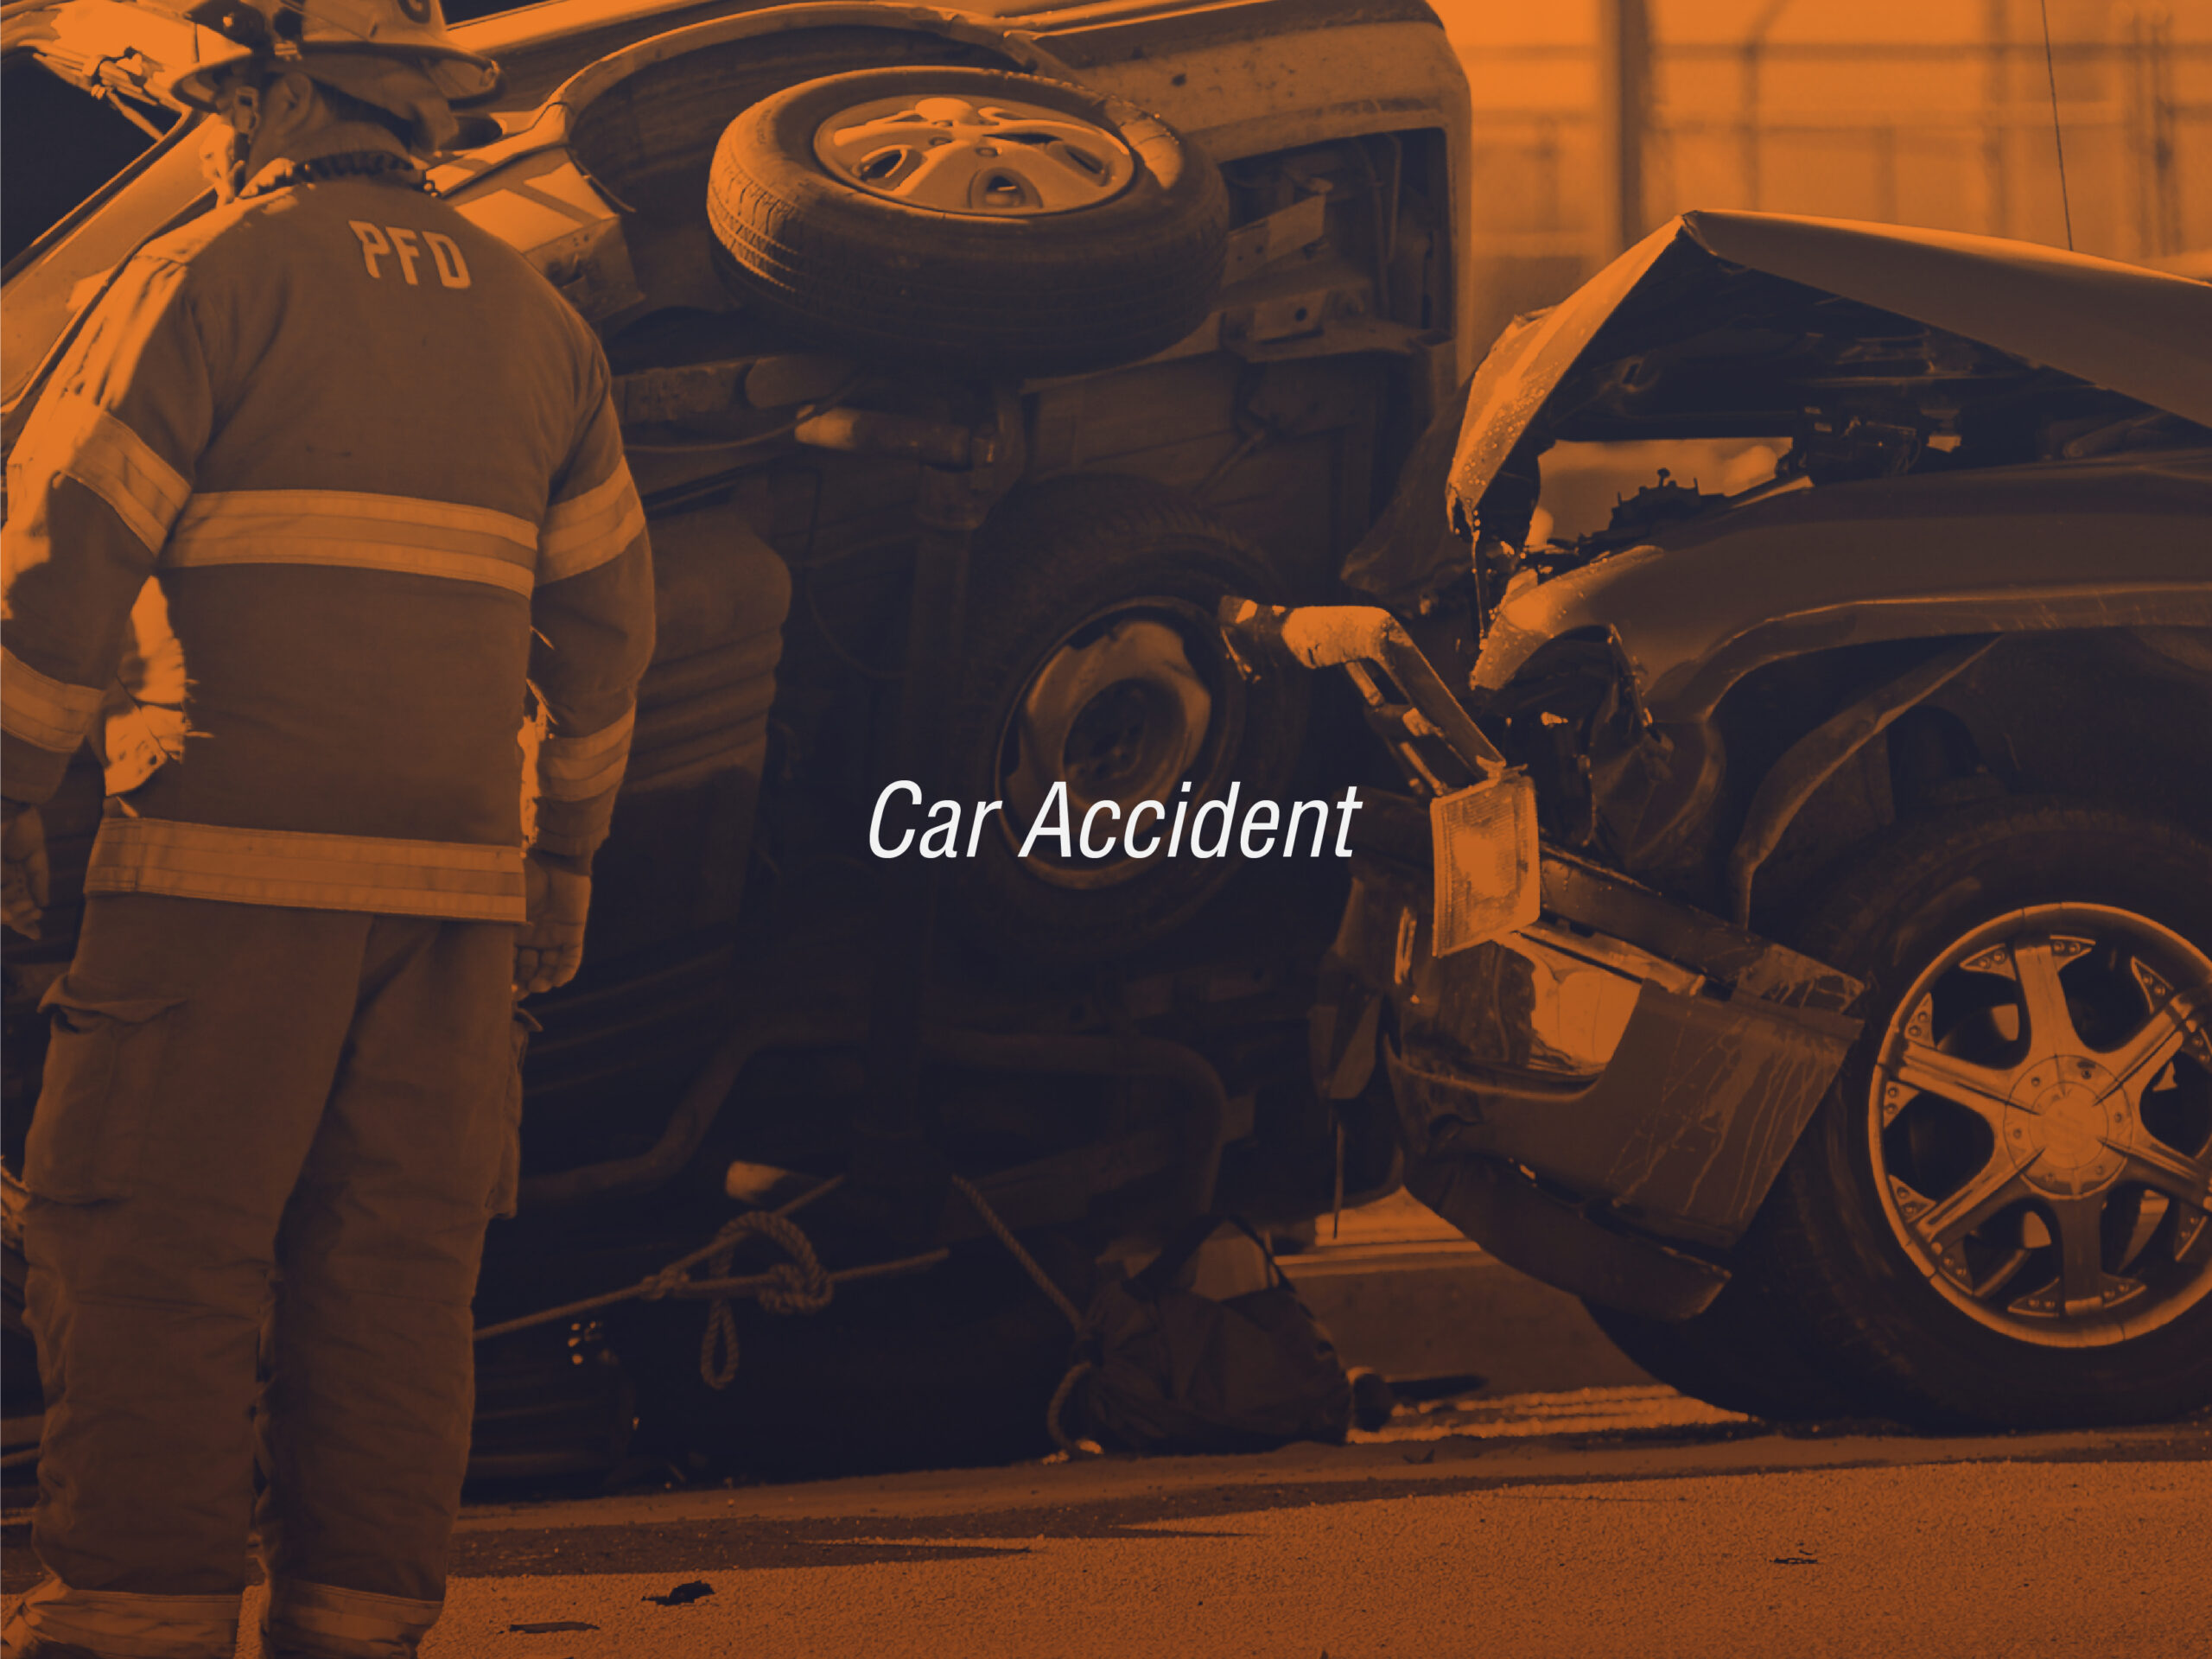 Get Compensated Fast: Hire a California Auto Accident Lawyer